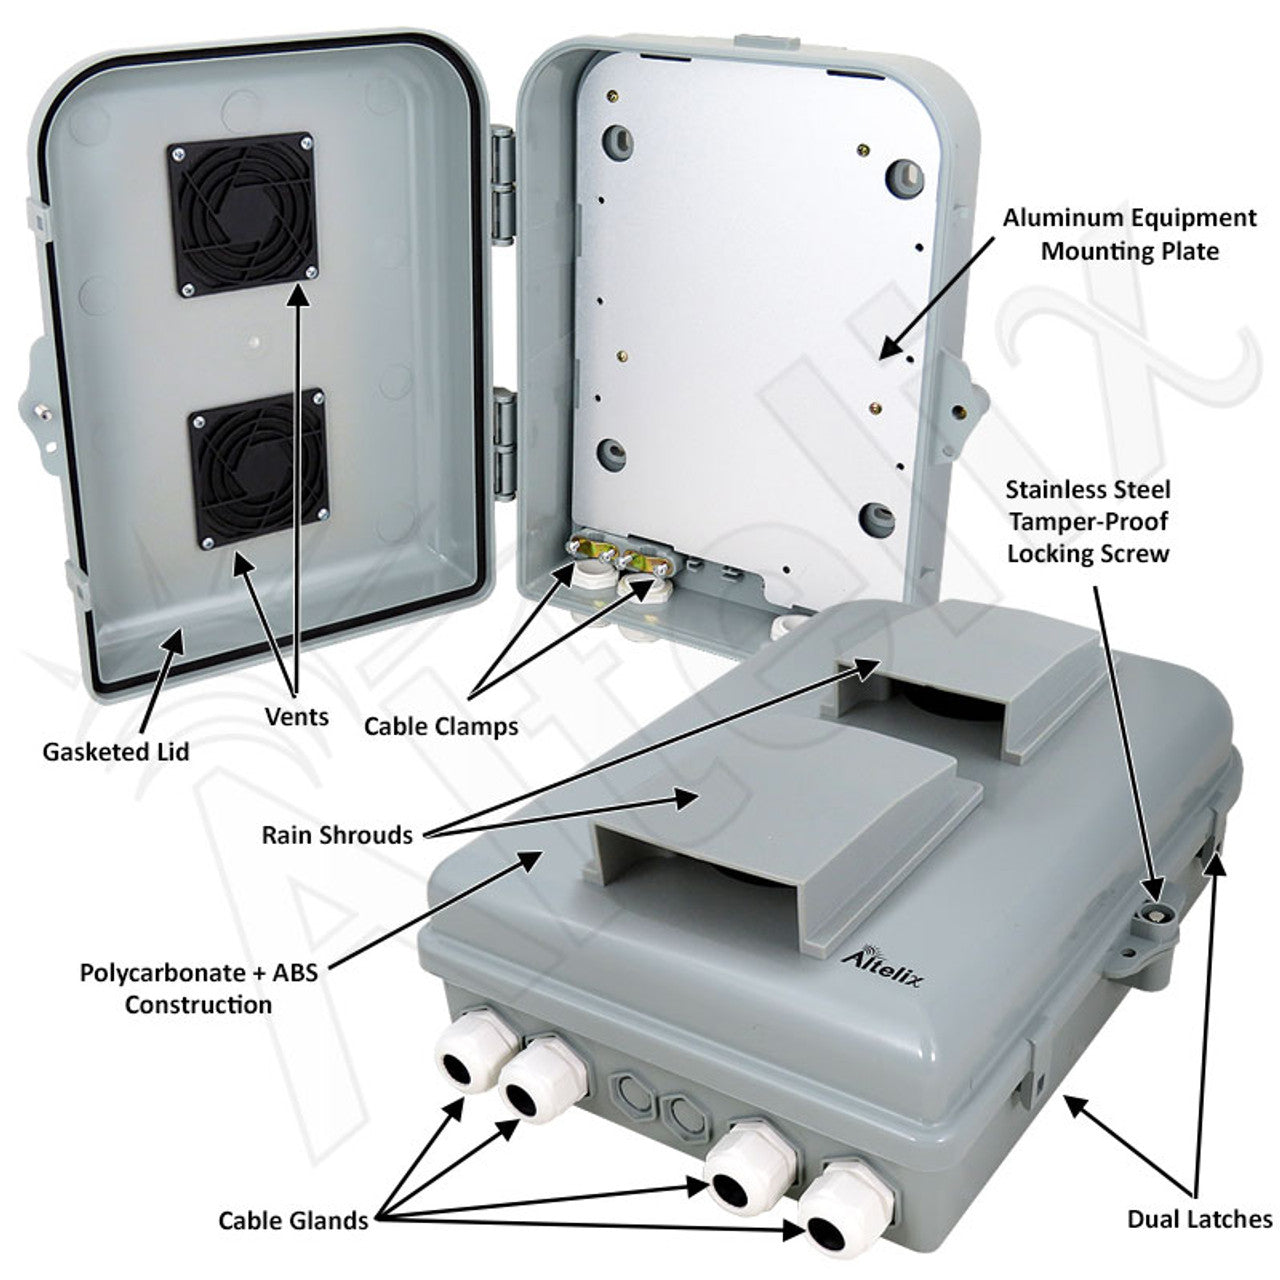 Altelix 13x10x4 PC+ABS Vented Weatherproof Utility Box NEMA Enclosure with Hinged Door and Aluminum Mounting Plate - 0